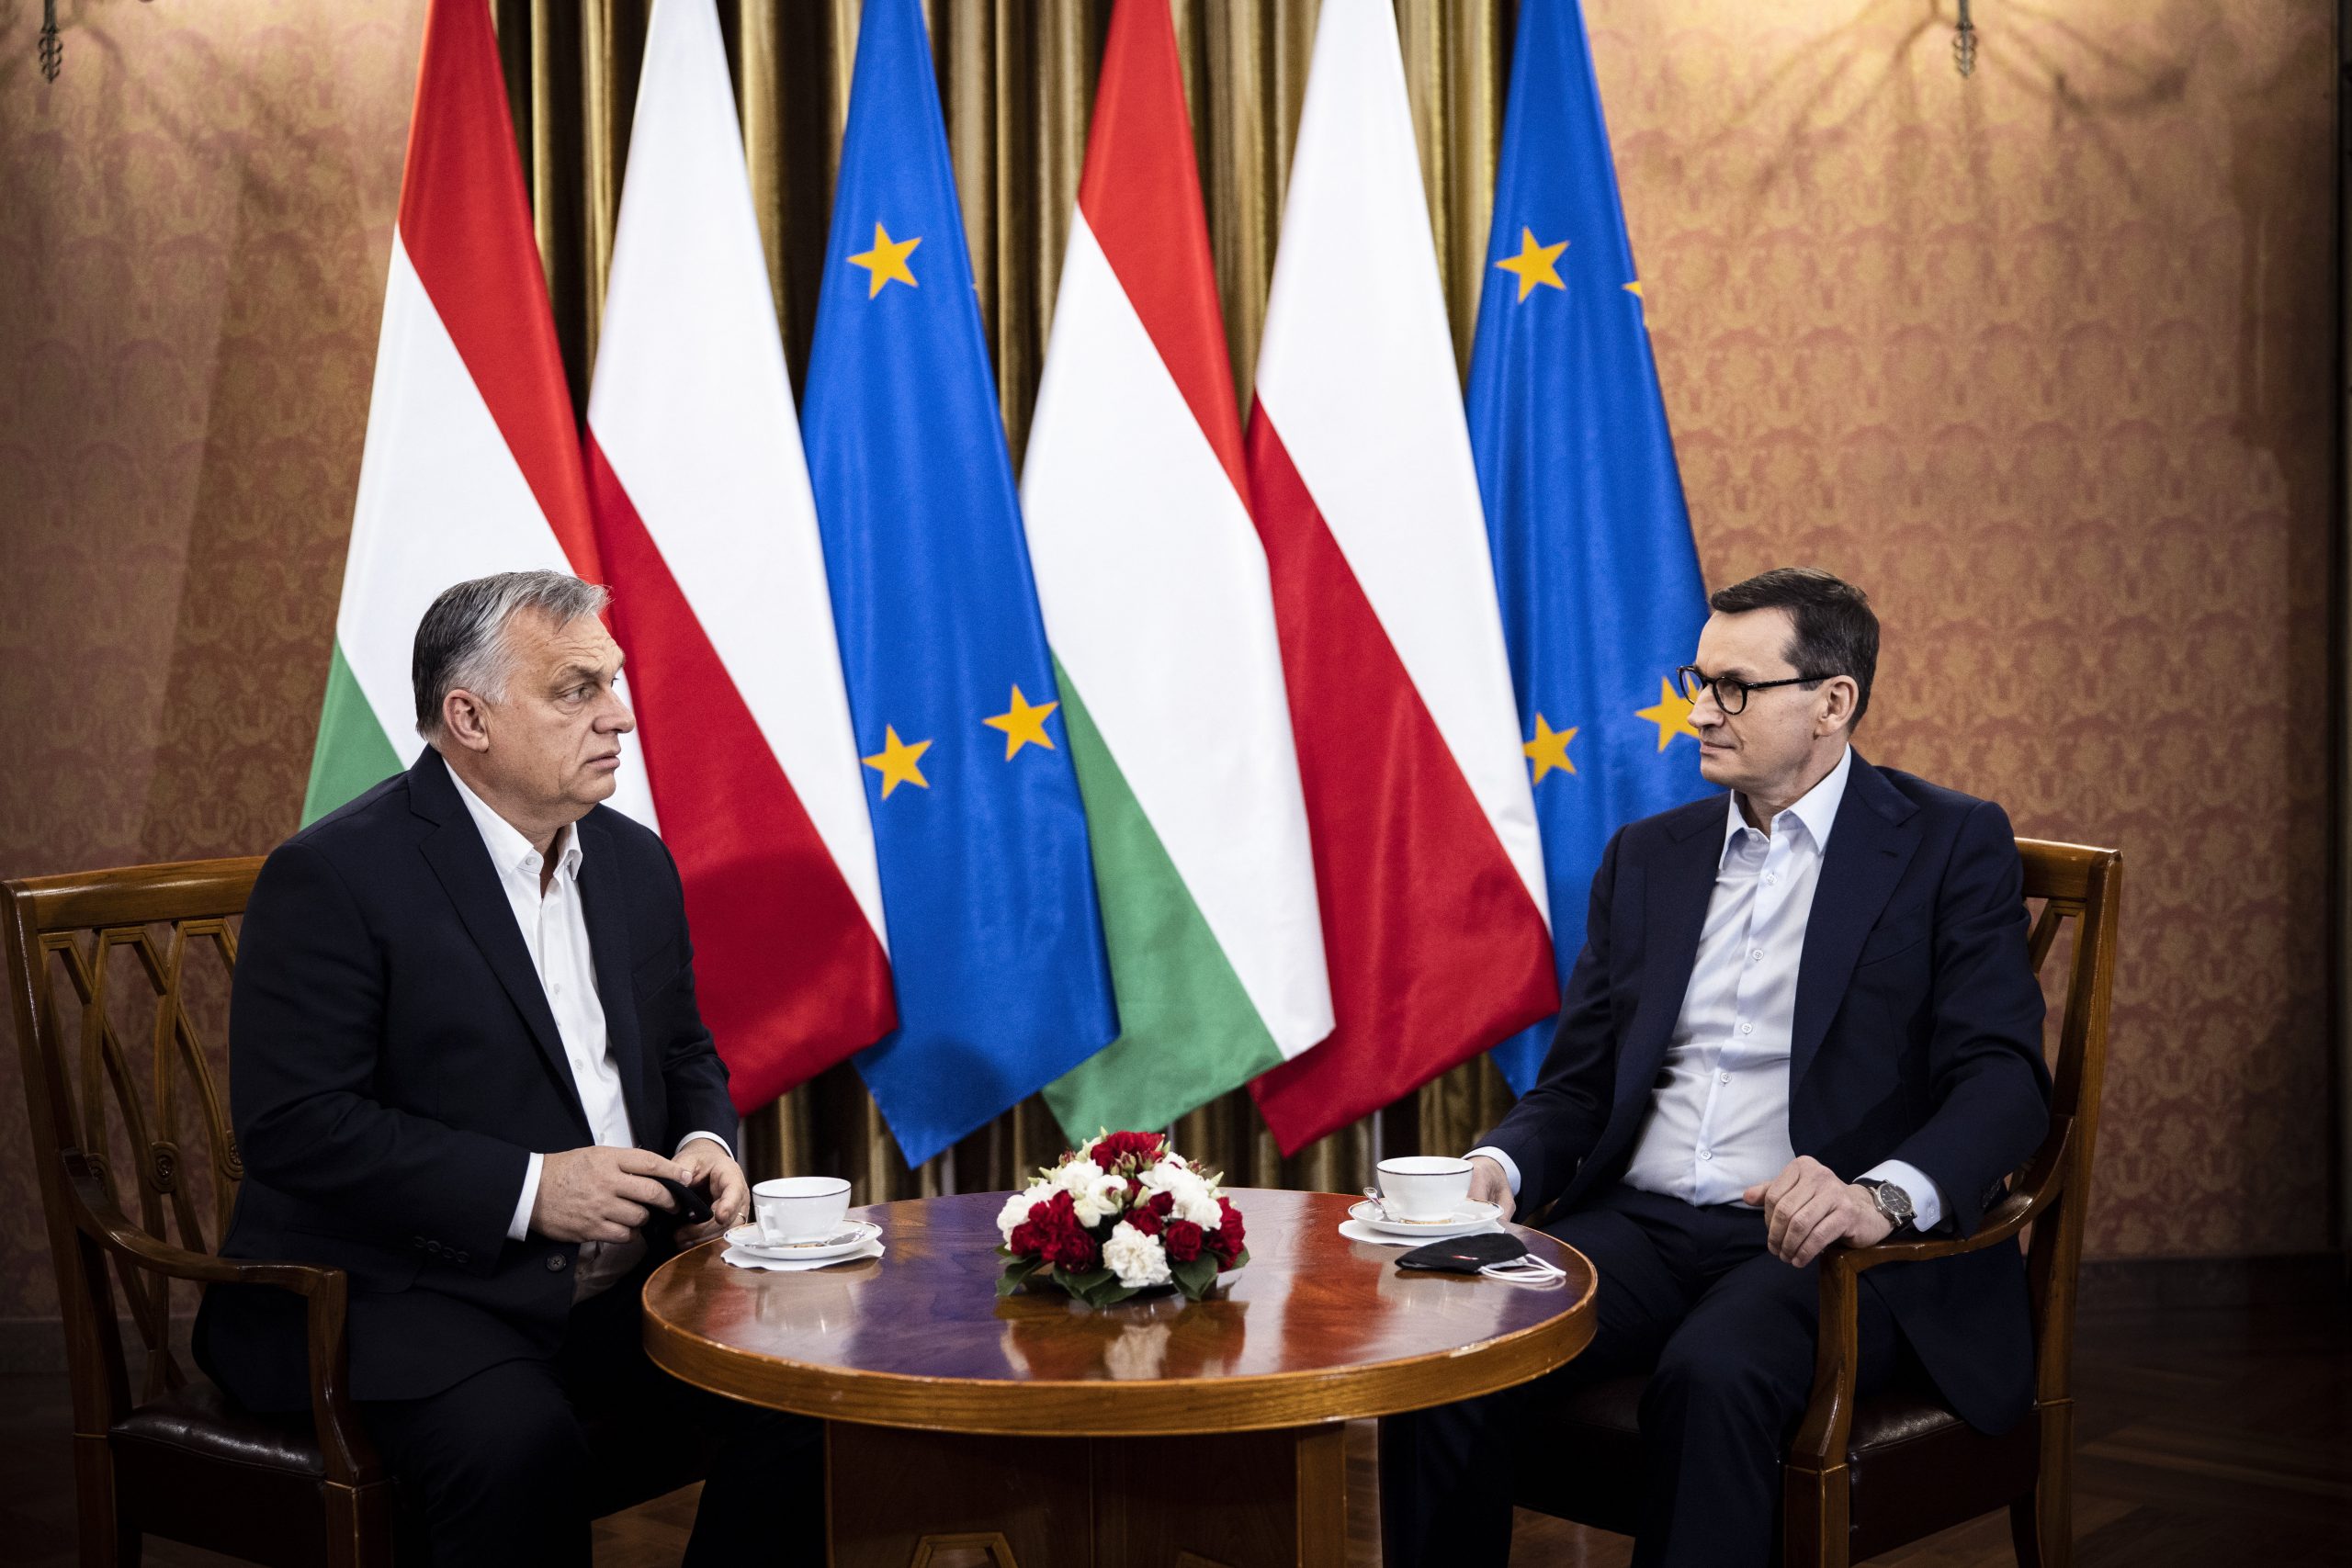 Relations Between Hungary and Poland Could Be Reinvigorated